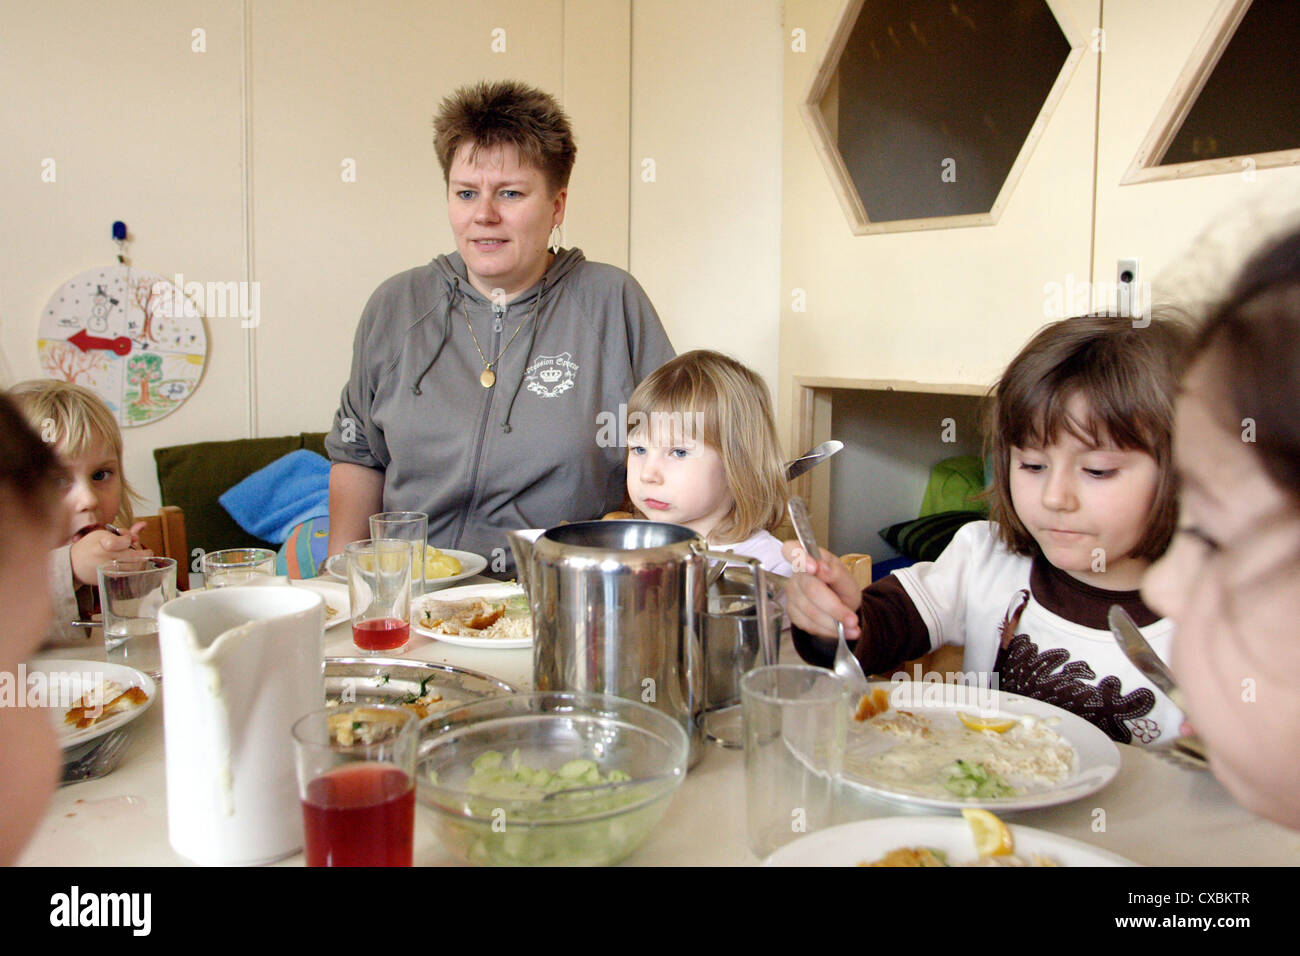 Berlin, children sit with a teacher at the table and eat lunch Stock Photo